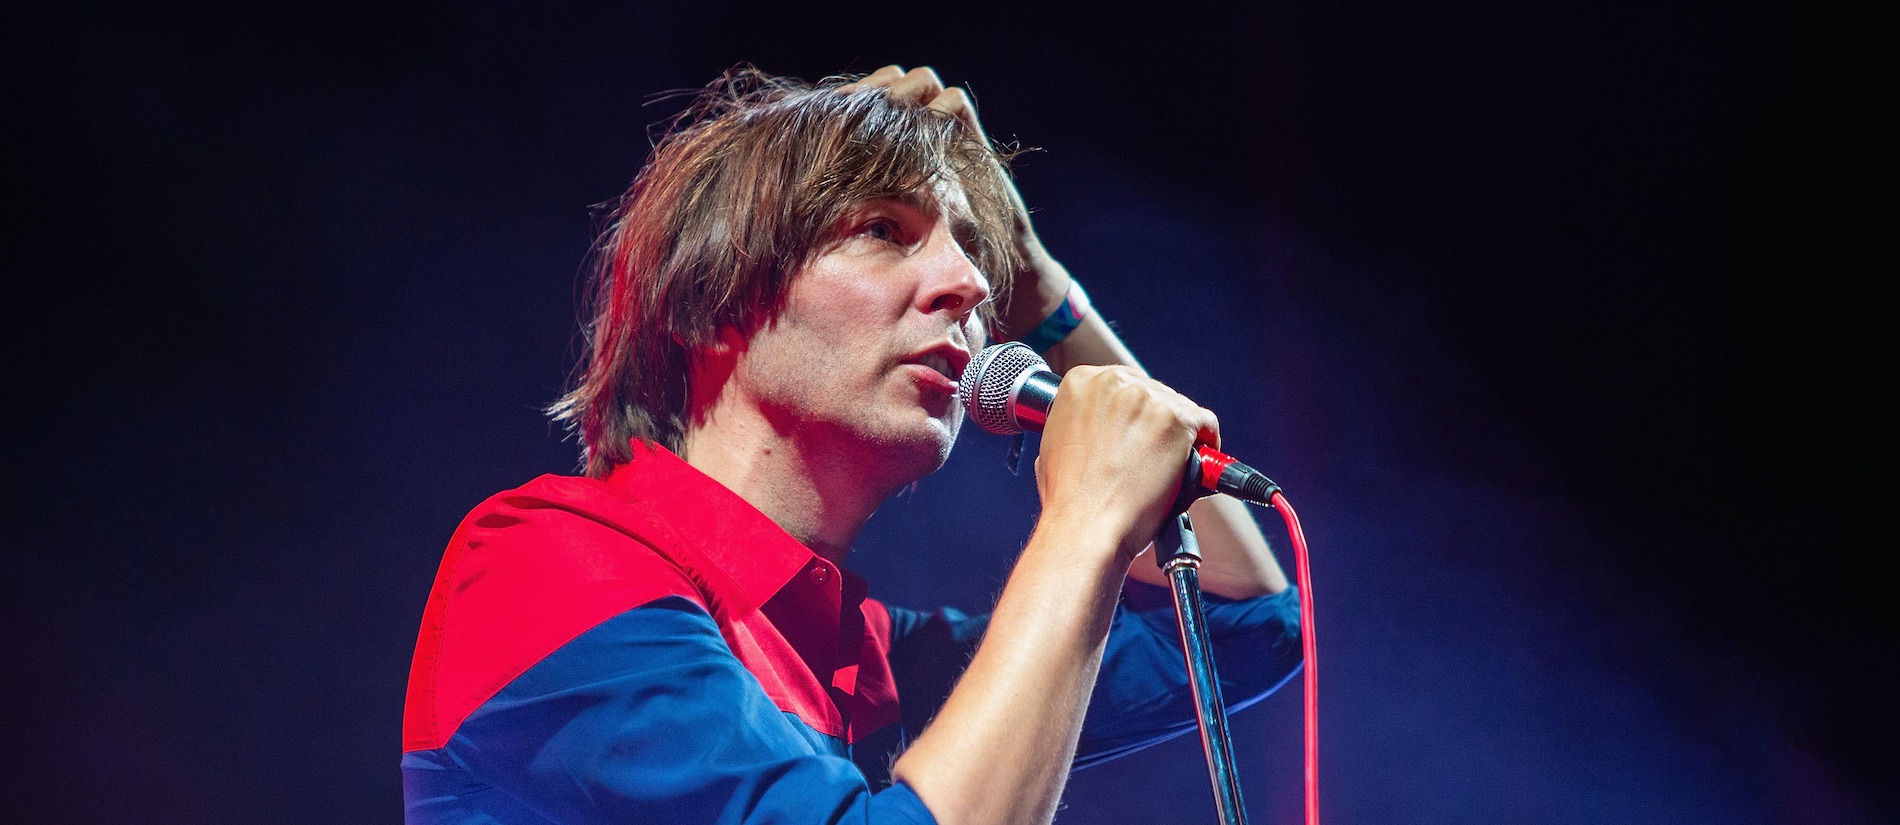 Phoenix’s Thomas Mars Quickly Vampire Food In A Great ‘What We